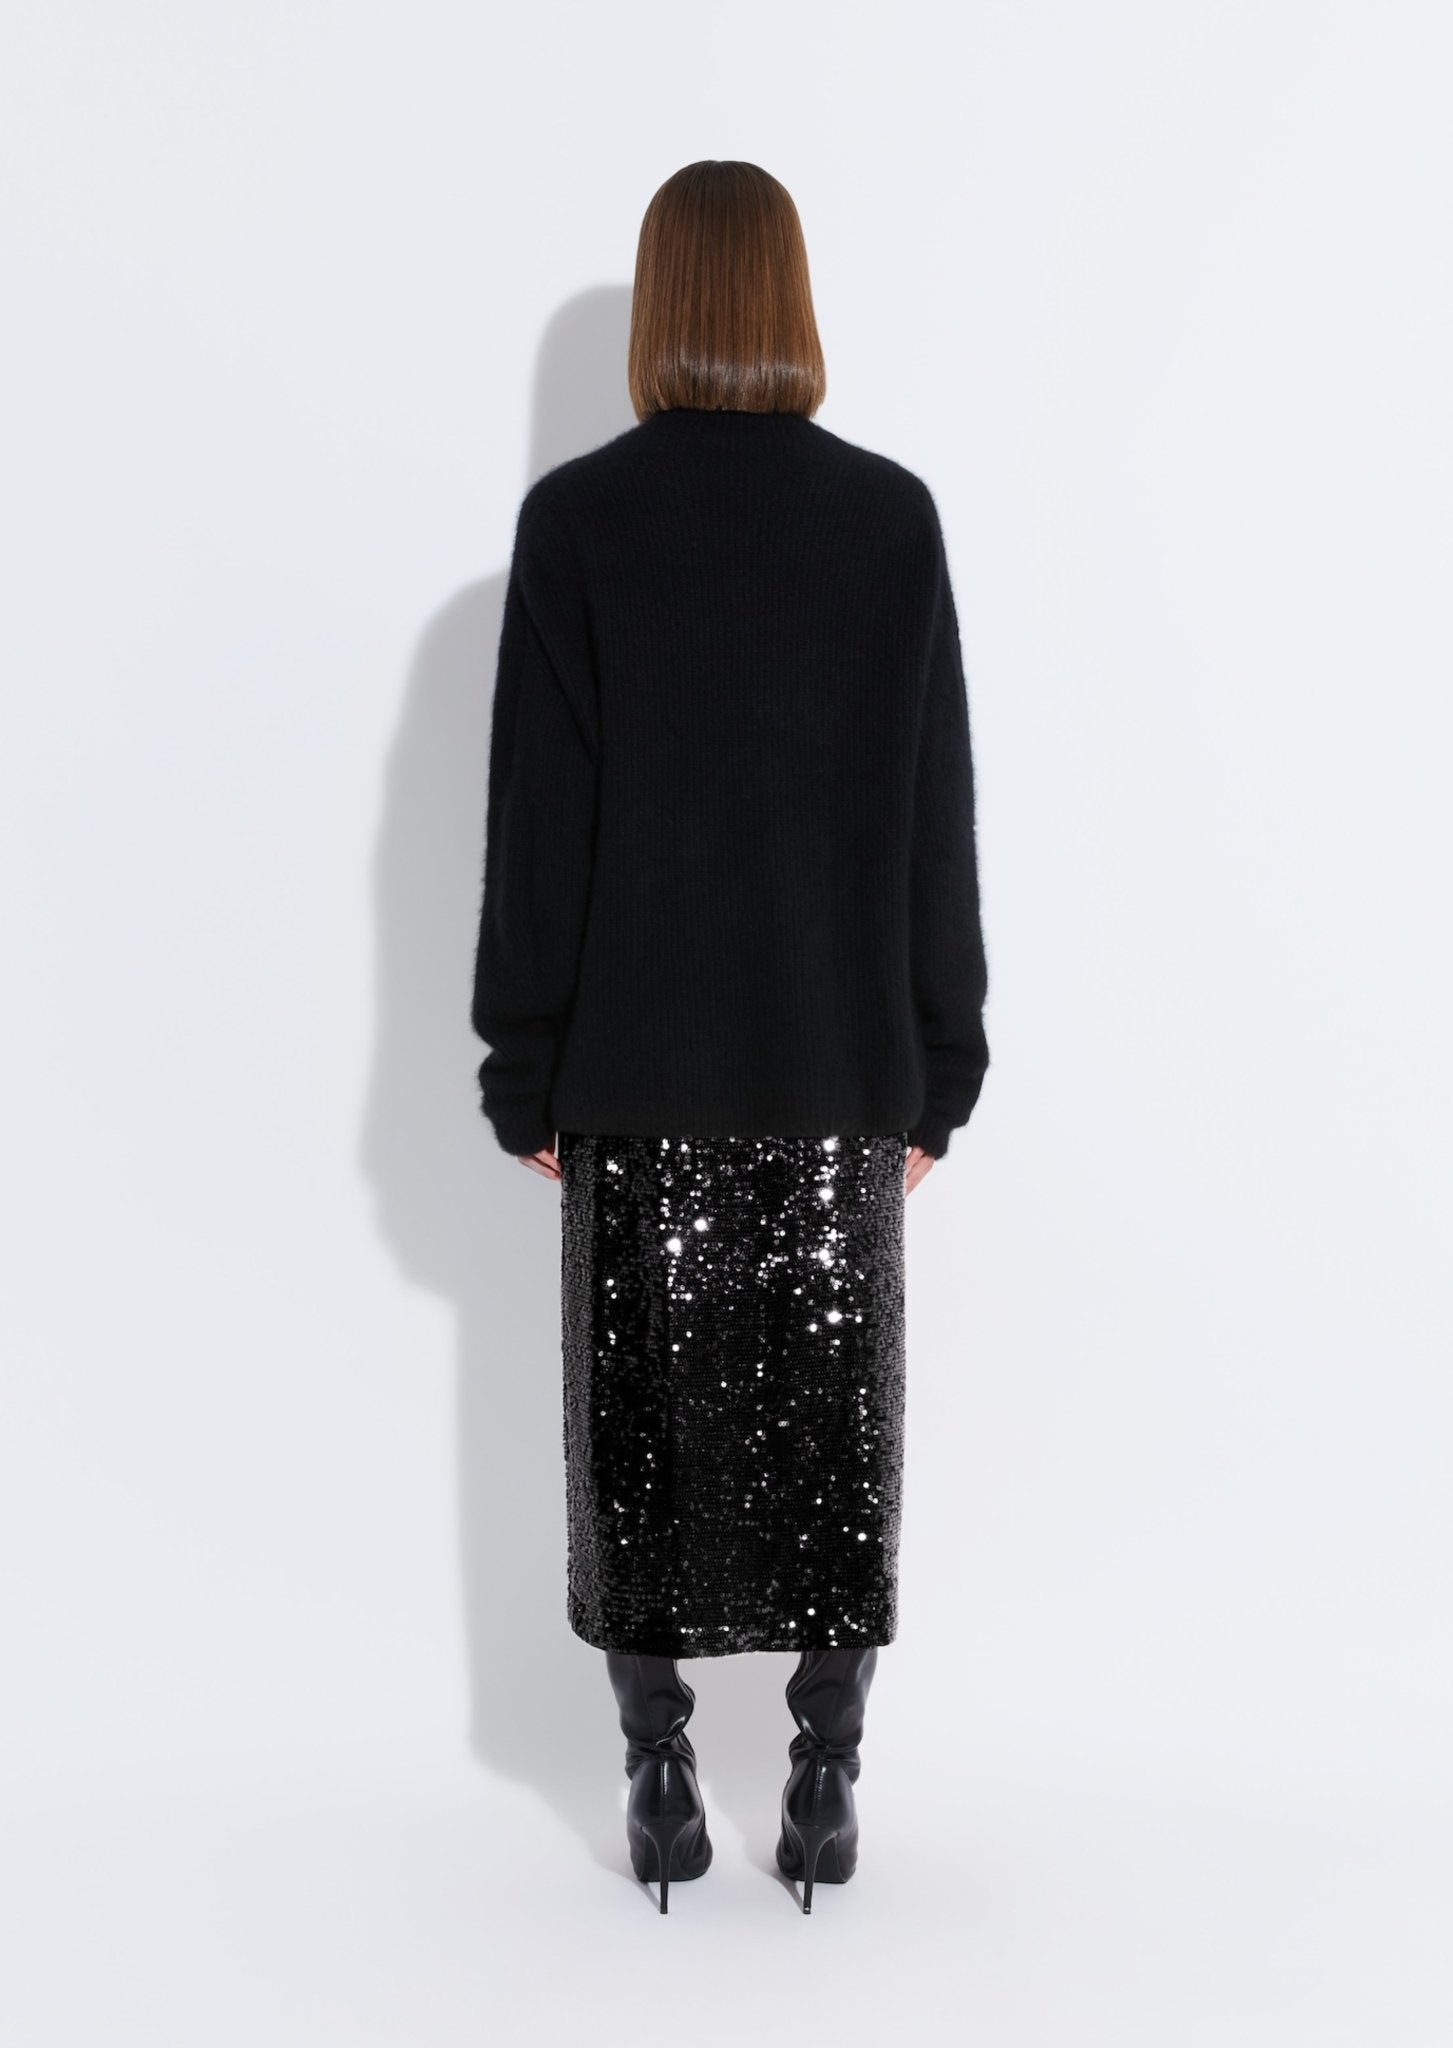 Sequin Skirt With Slit - LAPOINTE